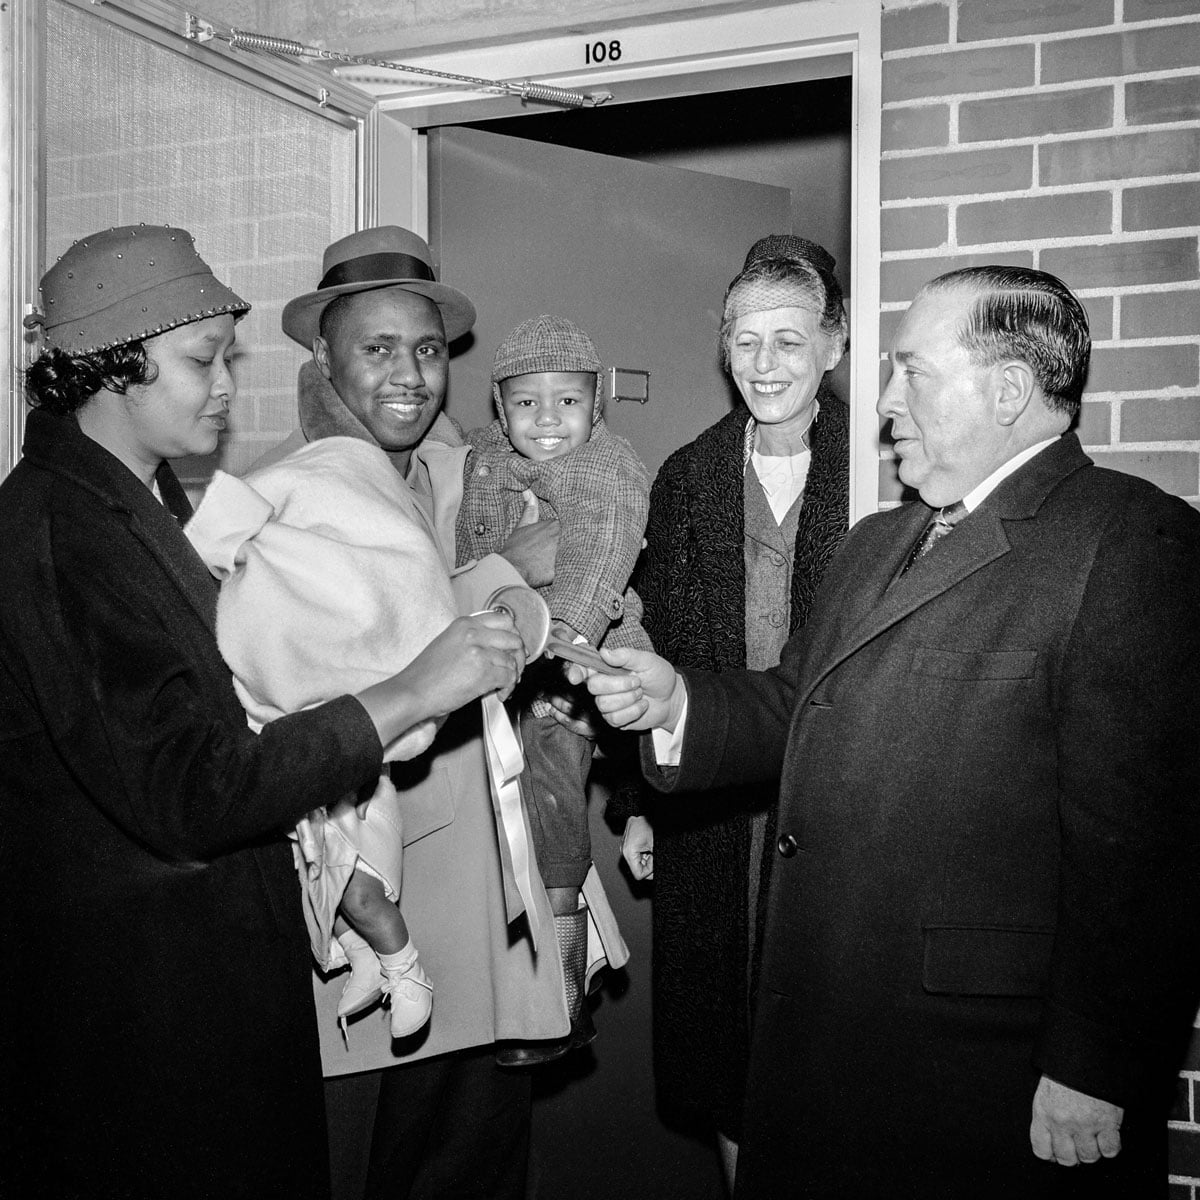 Daley greets the first tenants of the Robert Taylor Homes in 1962